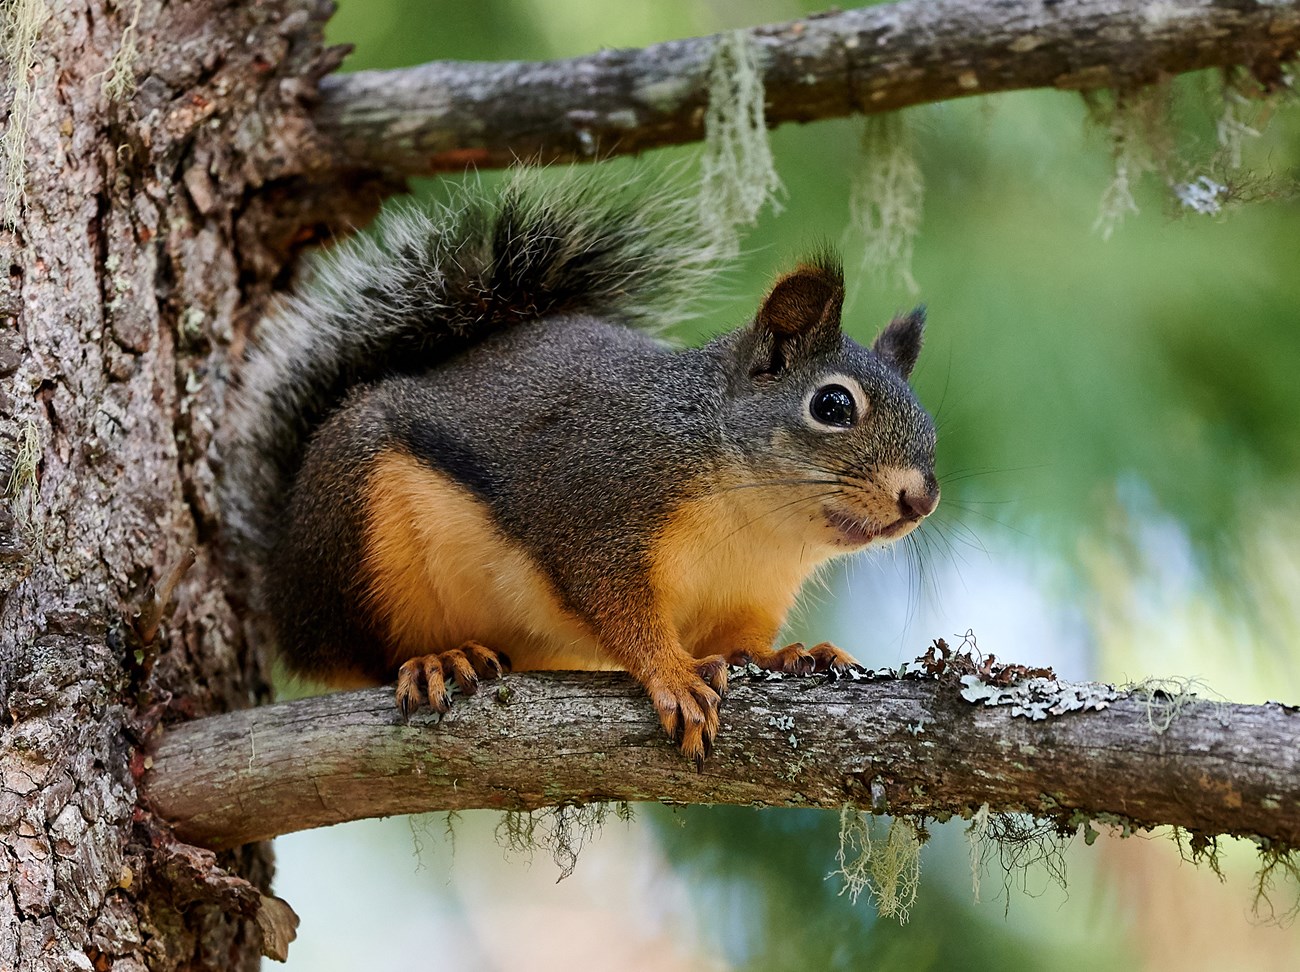 Medium sized squirrel with tawny belly, gray-brown back, whitish eye ring, and faint dark tufts on ears, perched in a tree.